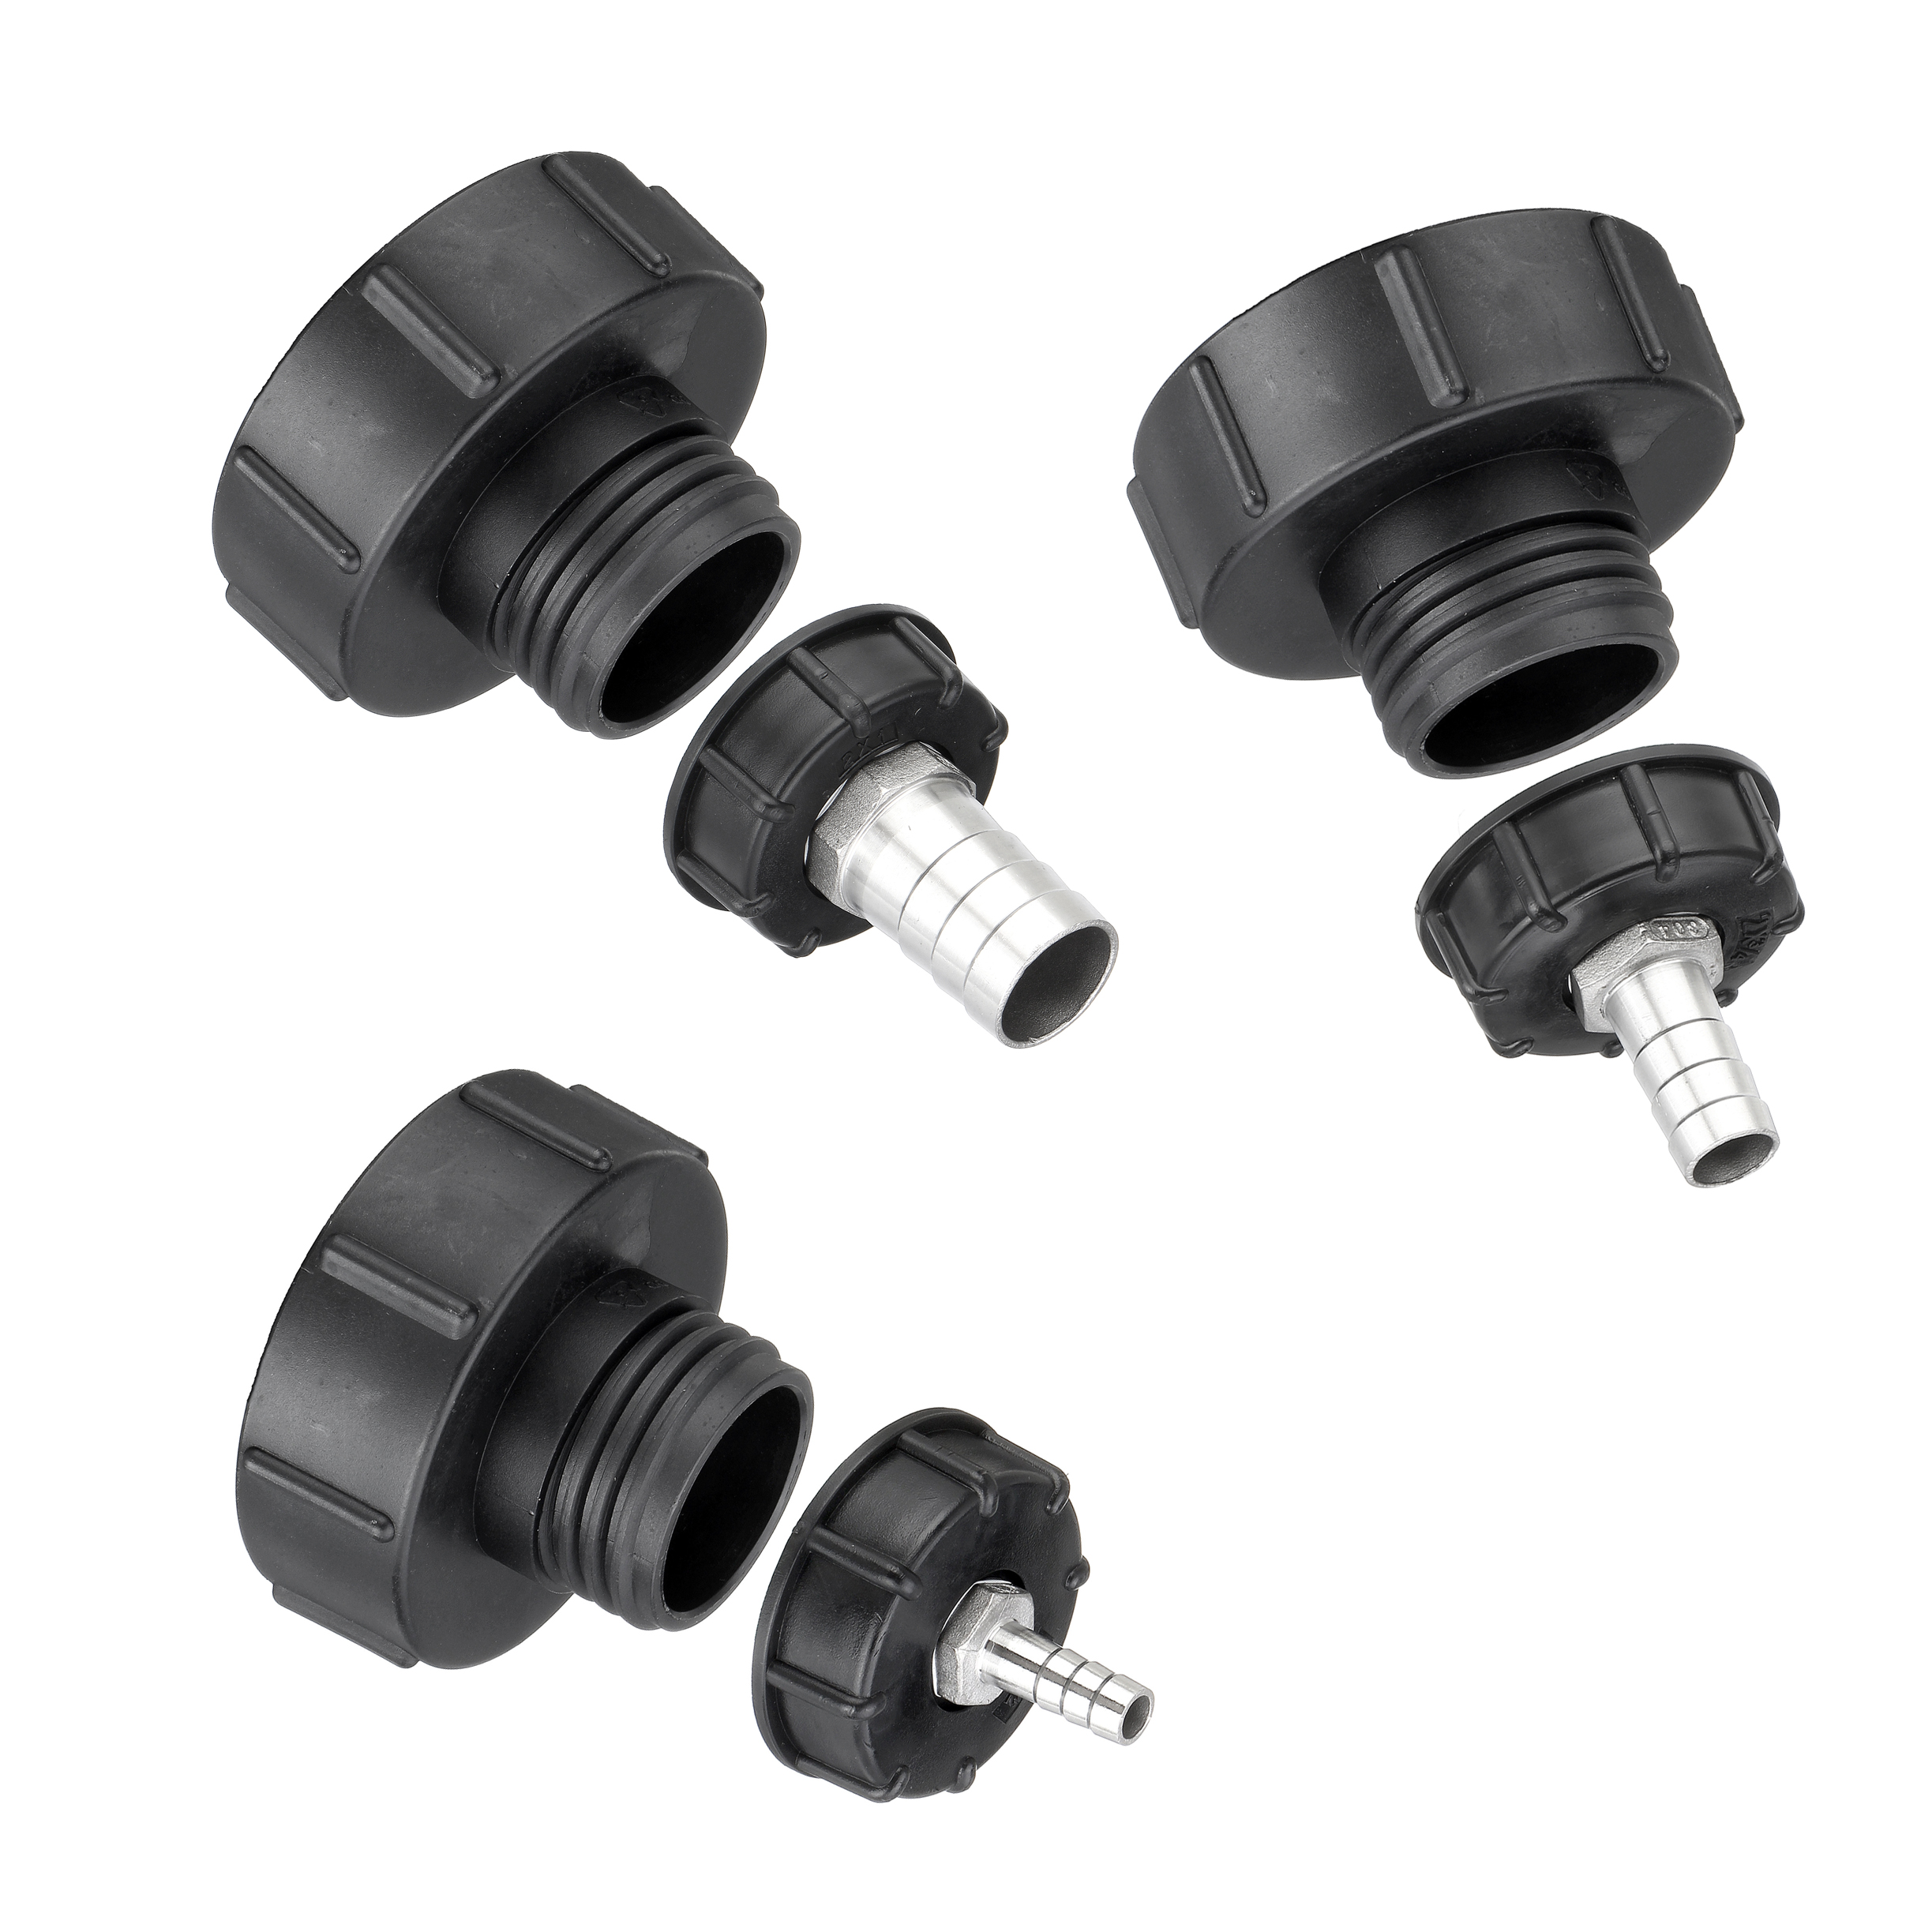 S100x8-1000L-IBC-Water-Tank-Garden-Hose-Adapter-Fittings-304-Stainless-Steel-Adapter-Outlet-Connecto-1550457